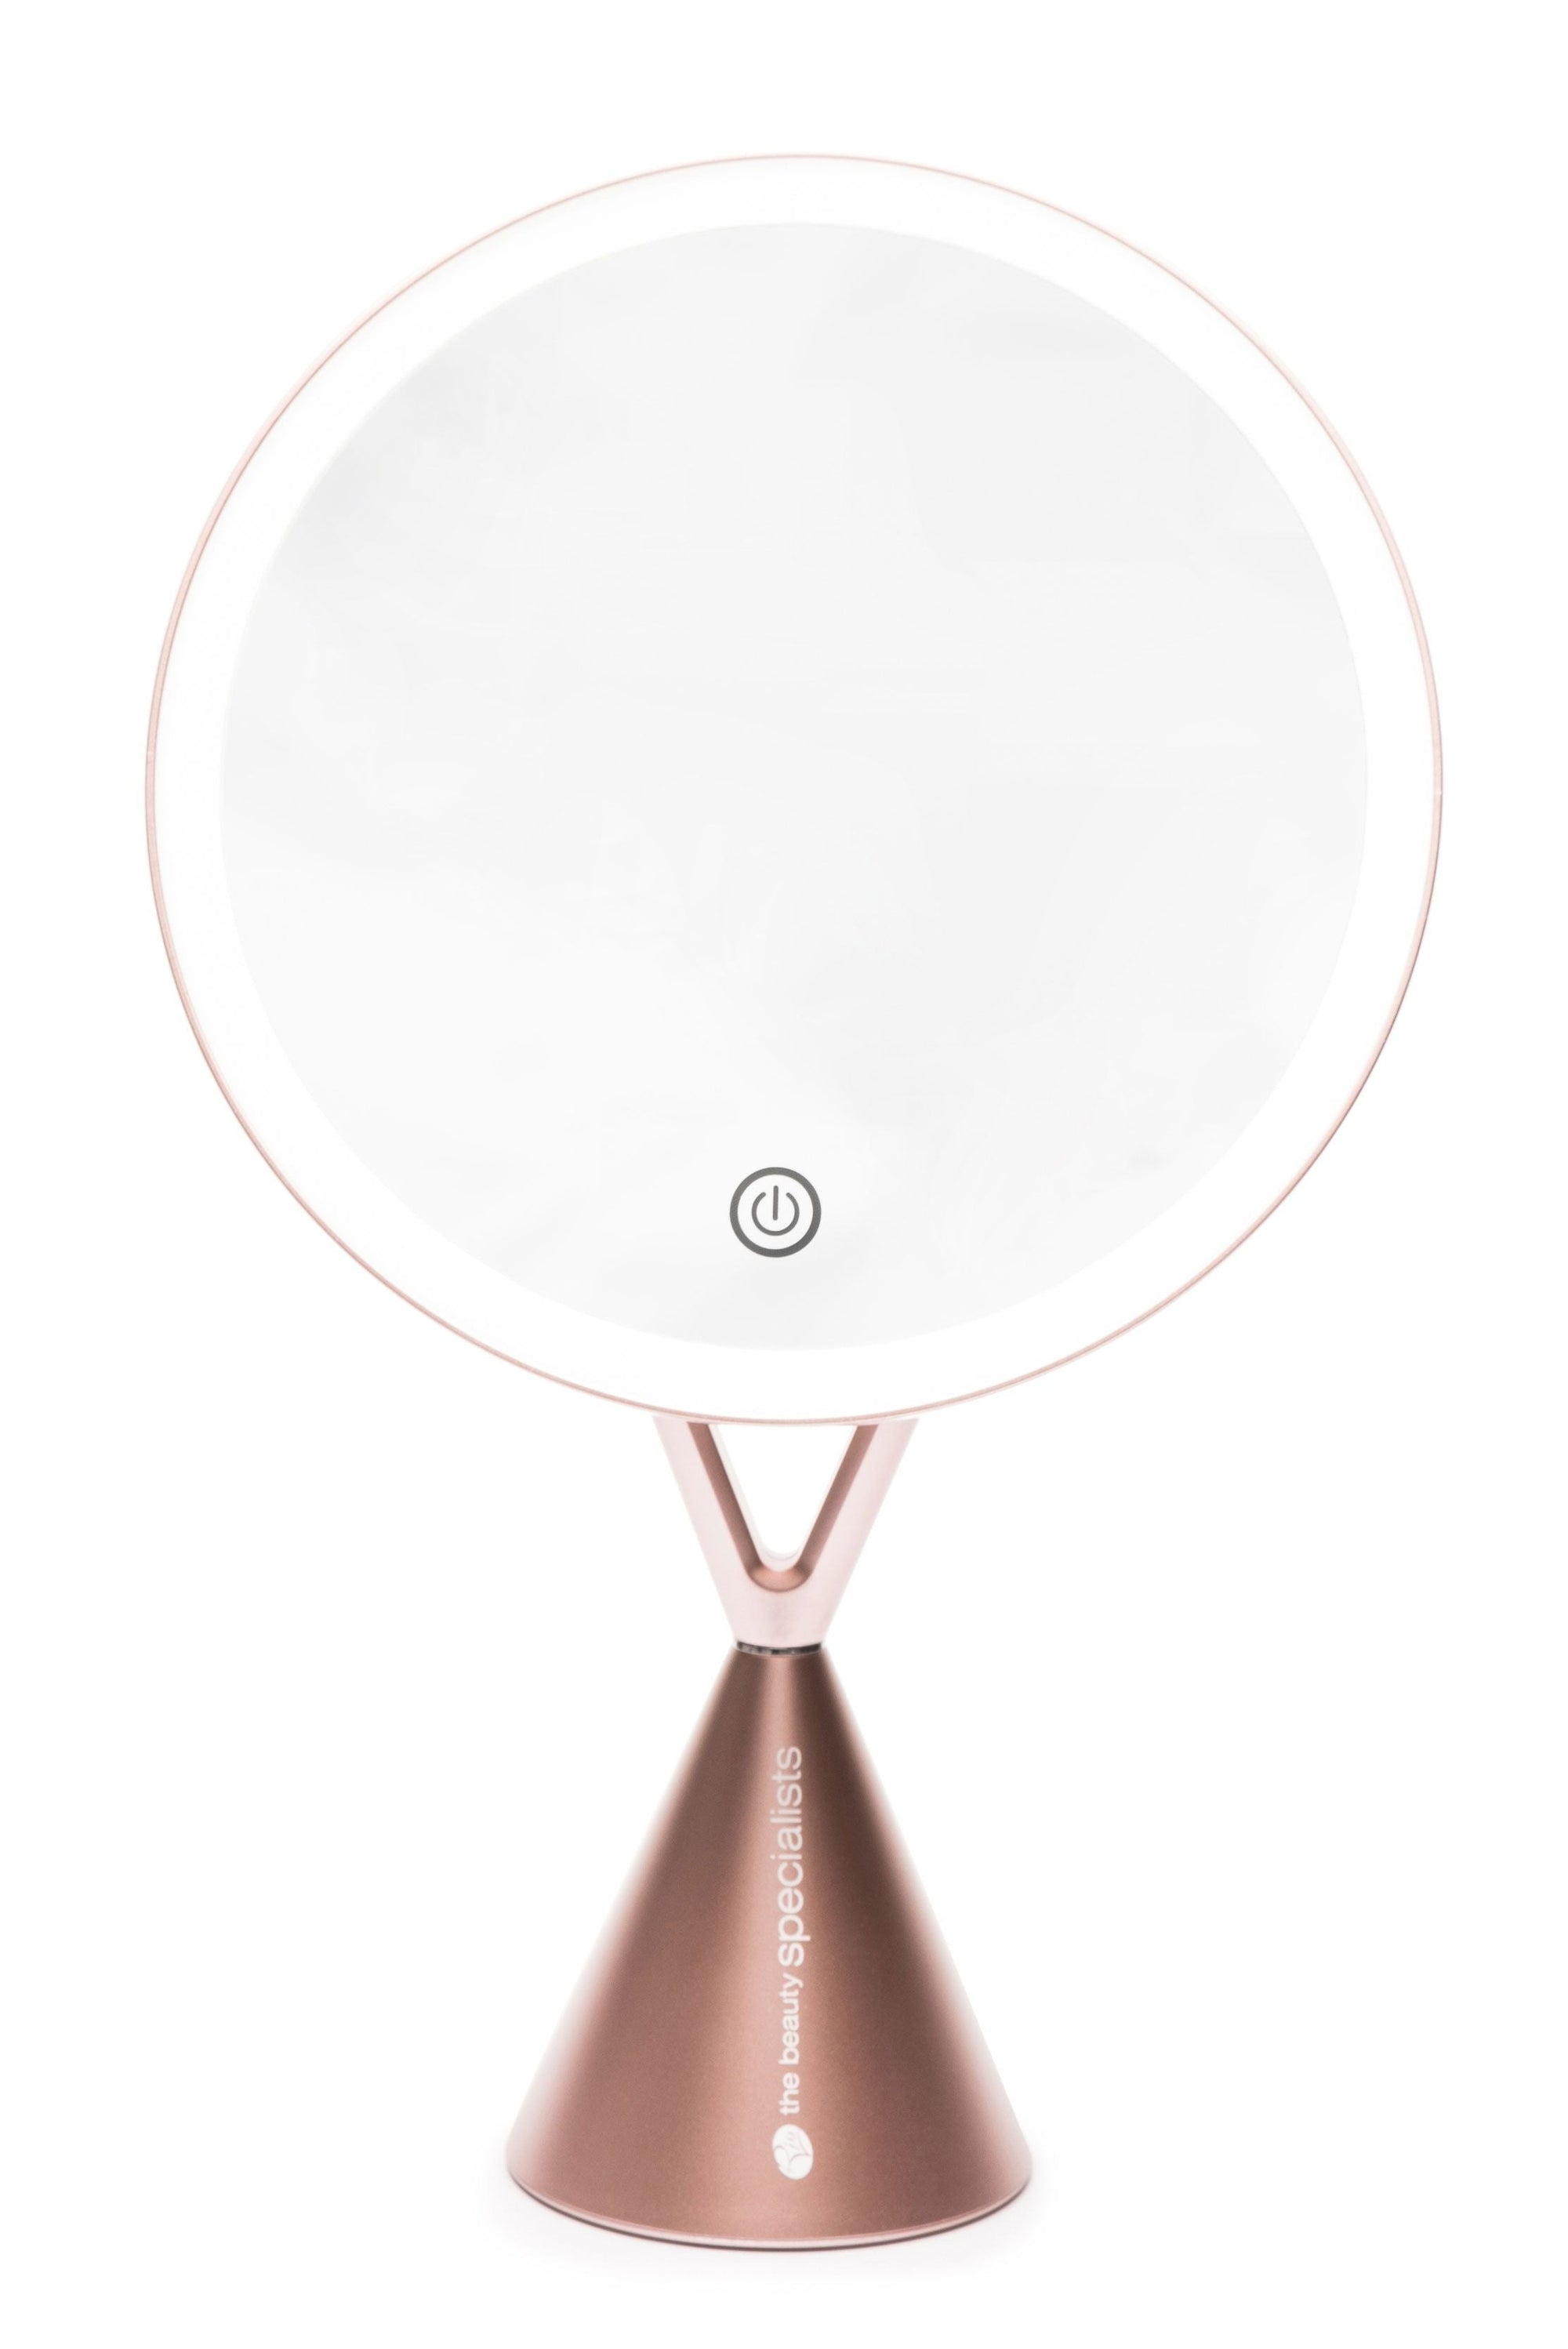 HD Illuminated Makeup Mirror with compact magnifying mirror